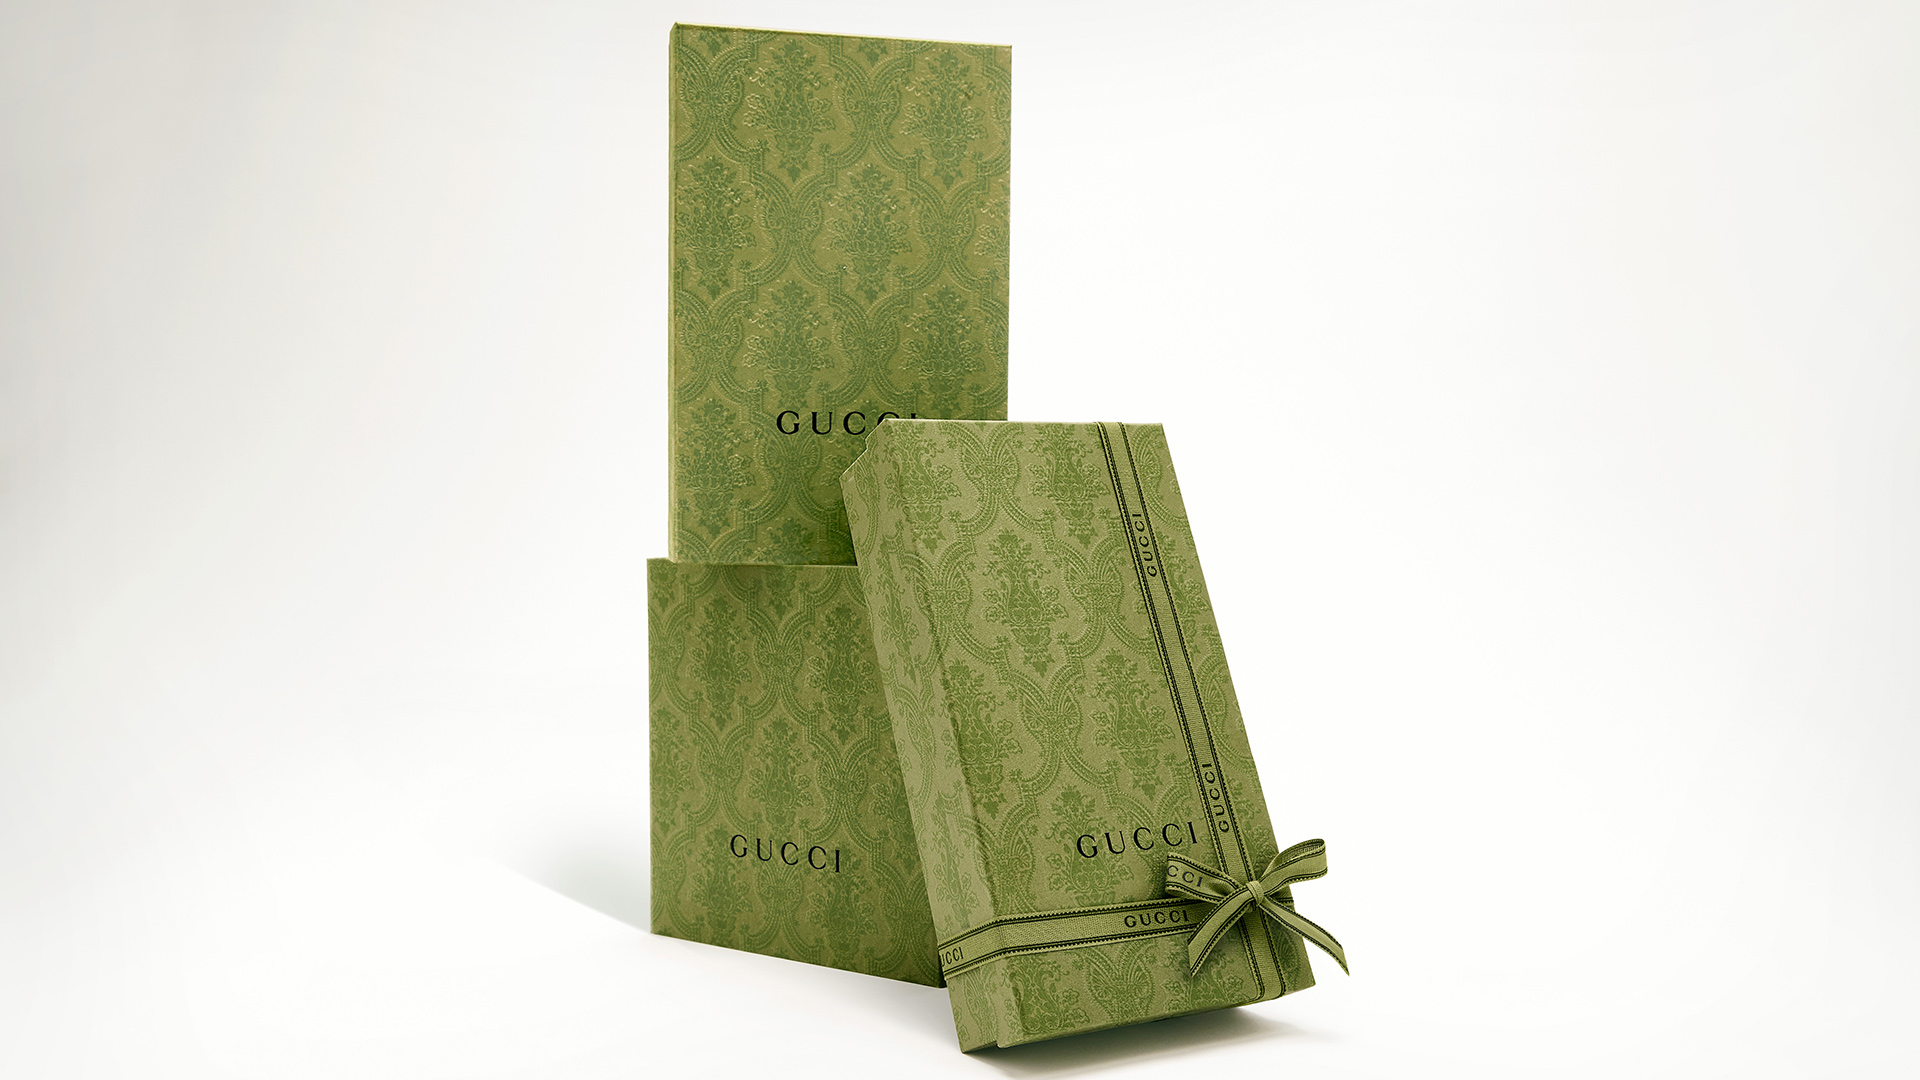 Gucci's Sustainable Packaging – Gucci Equilibrium